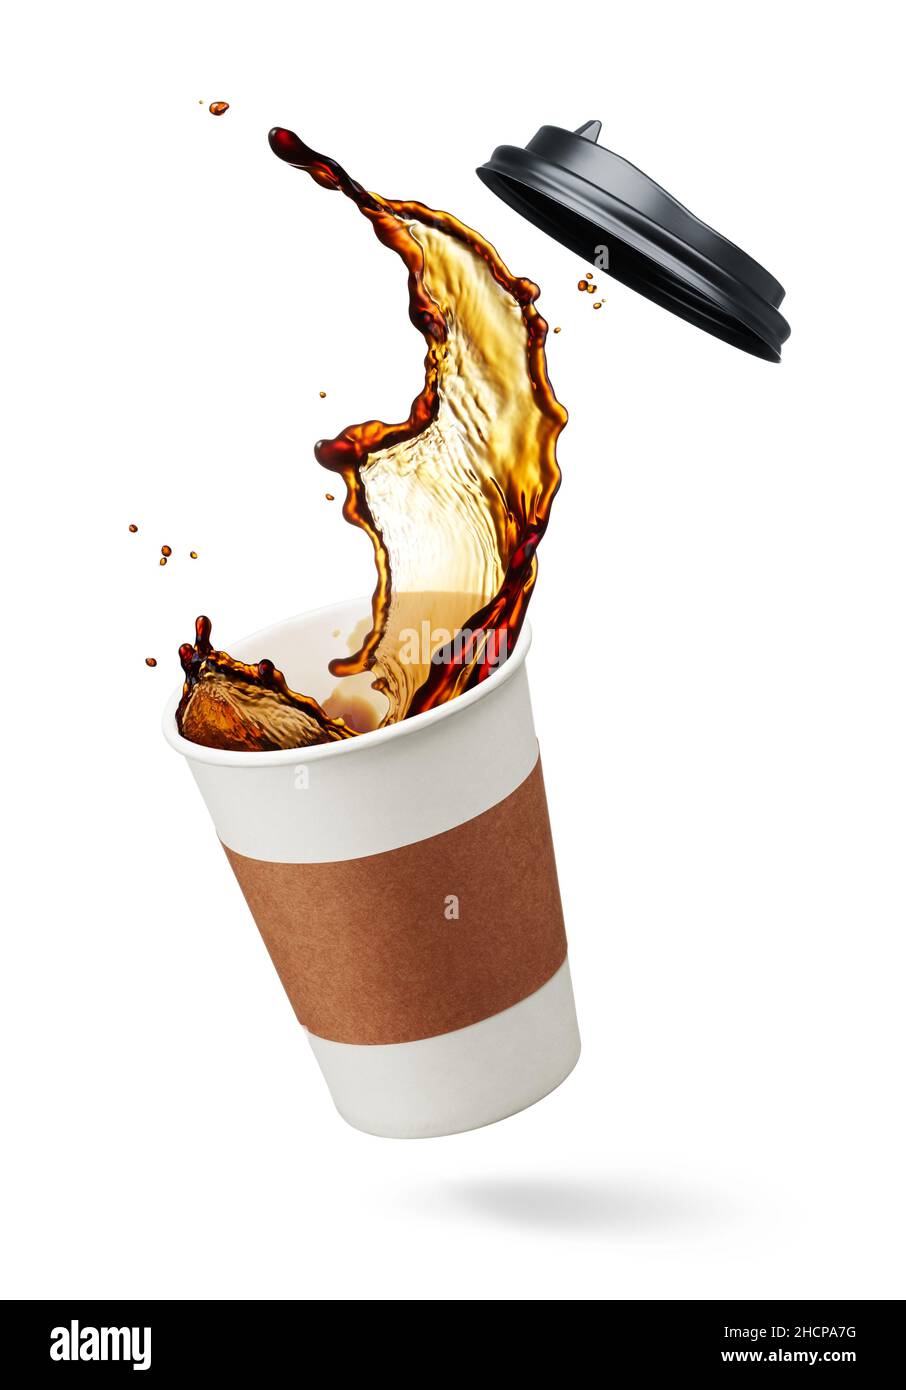 cup of coffee splashing or spilling Stock Photo